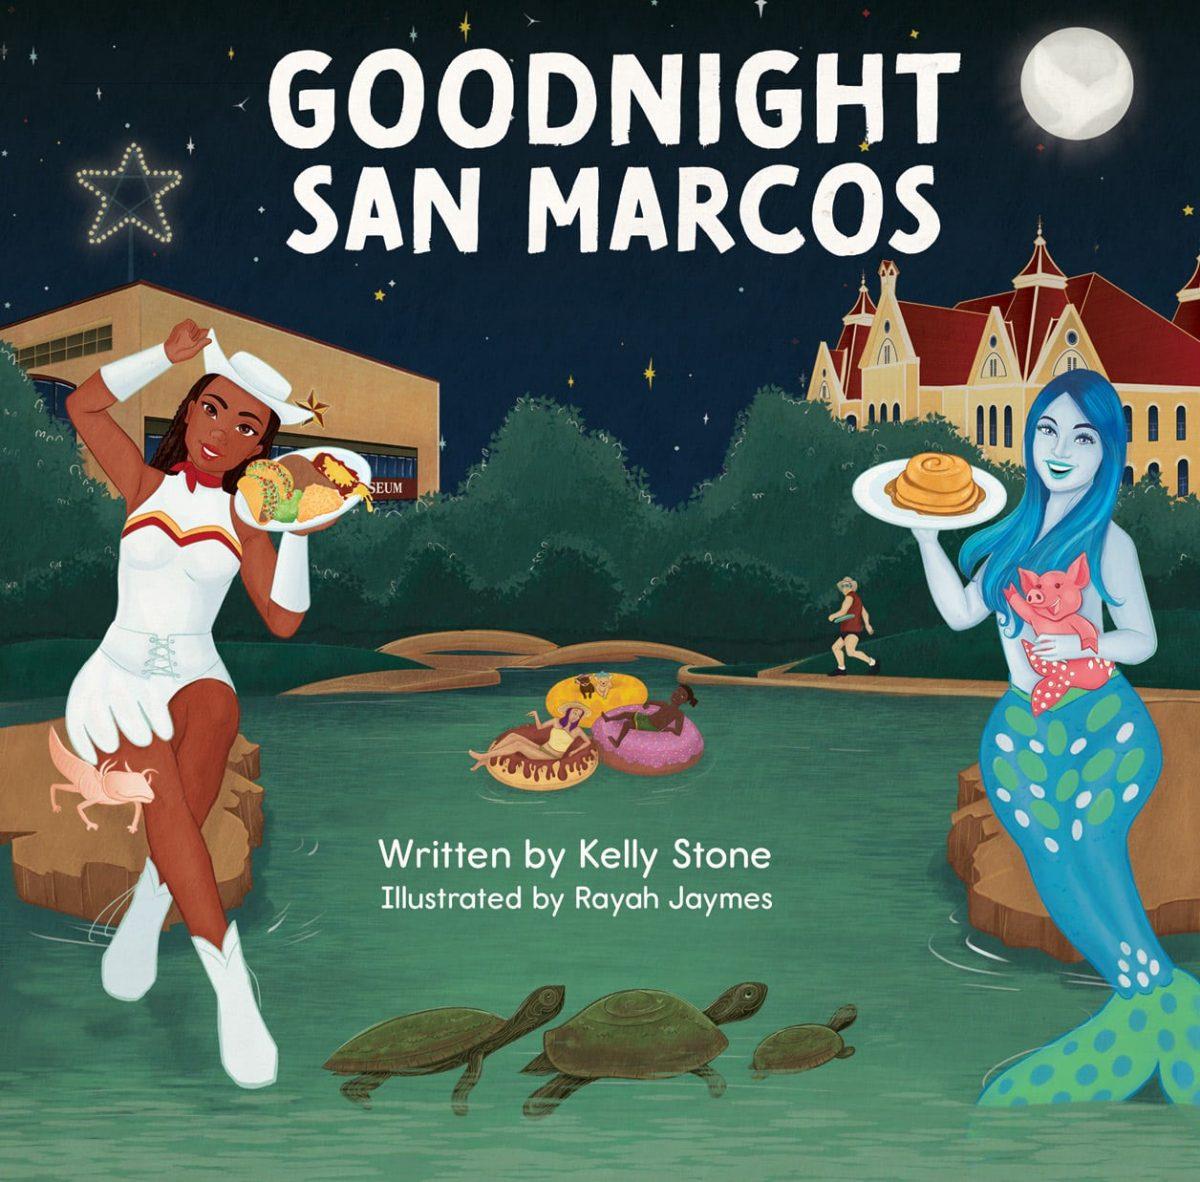 The+cover+of+Kelly+Stones+book+Goodnight+San+Marcos+illustrated+by+Rayah+Jaymes.